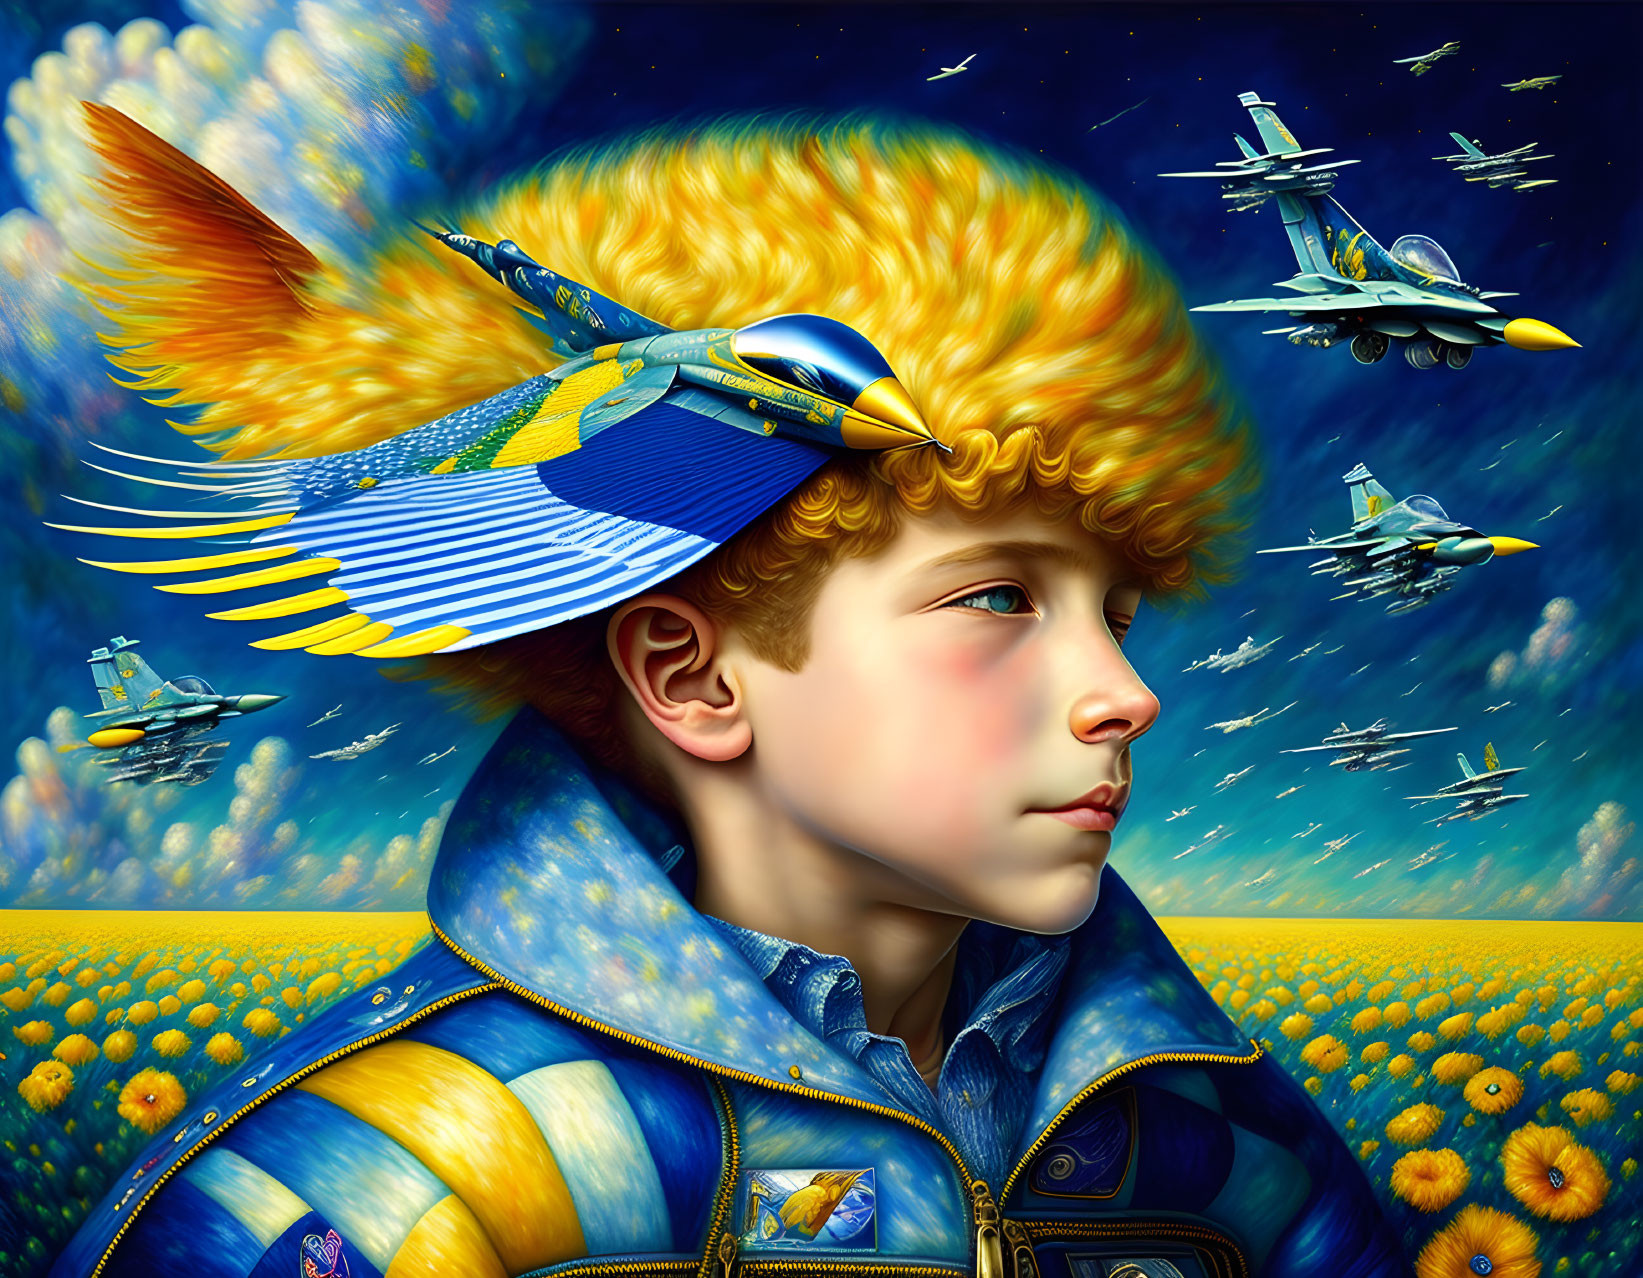 A one boy rides a blue yellow F-16, wind blowing h